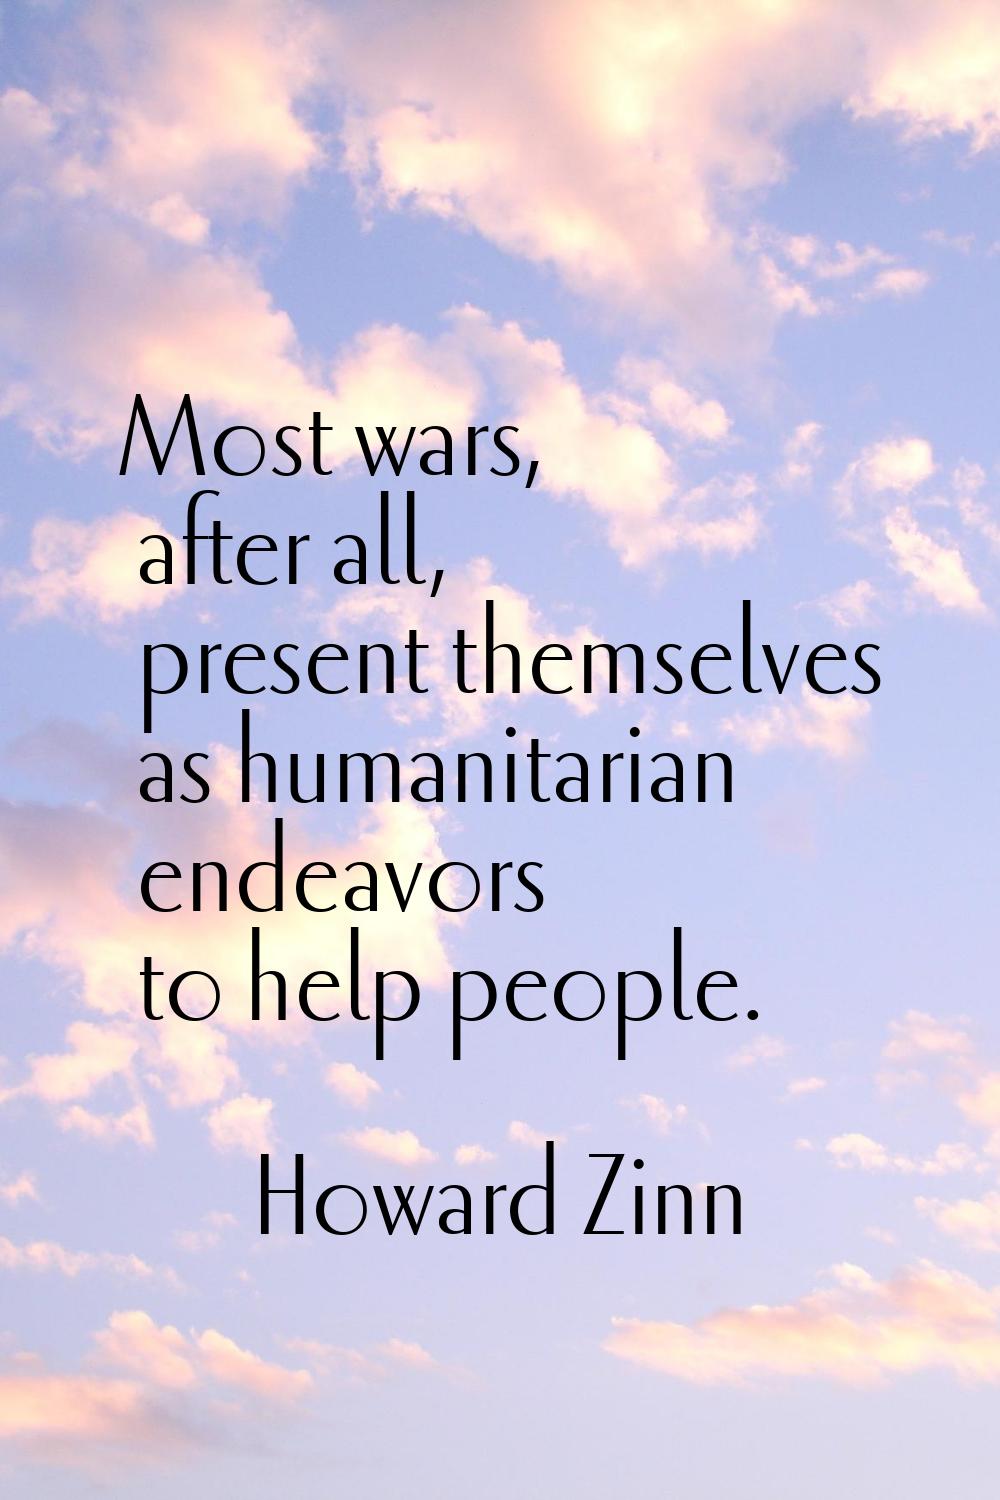 Most wars, after all, present themselves as humanitarian endeavors to help people.